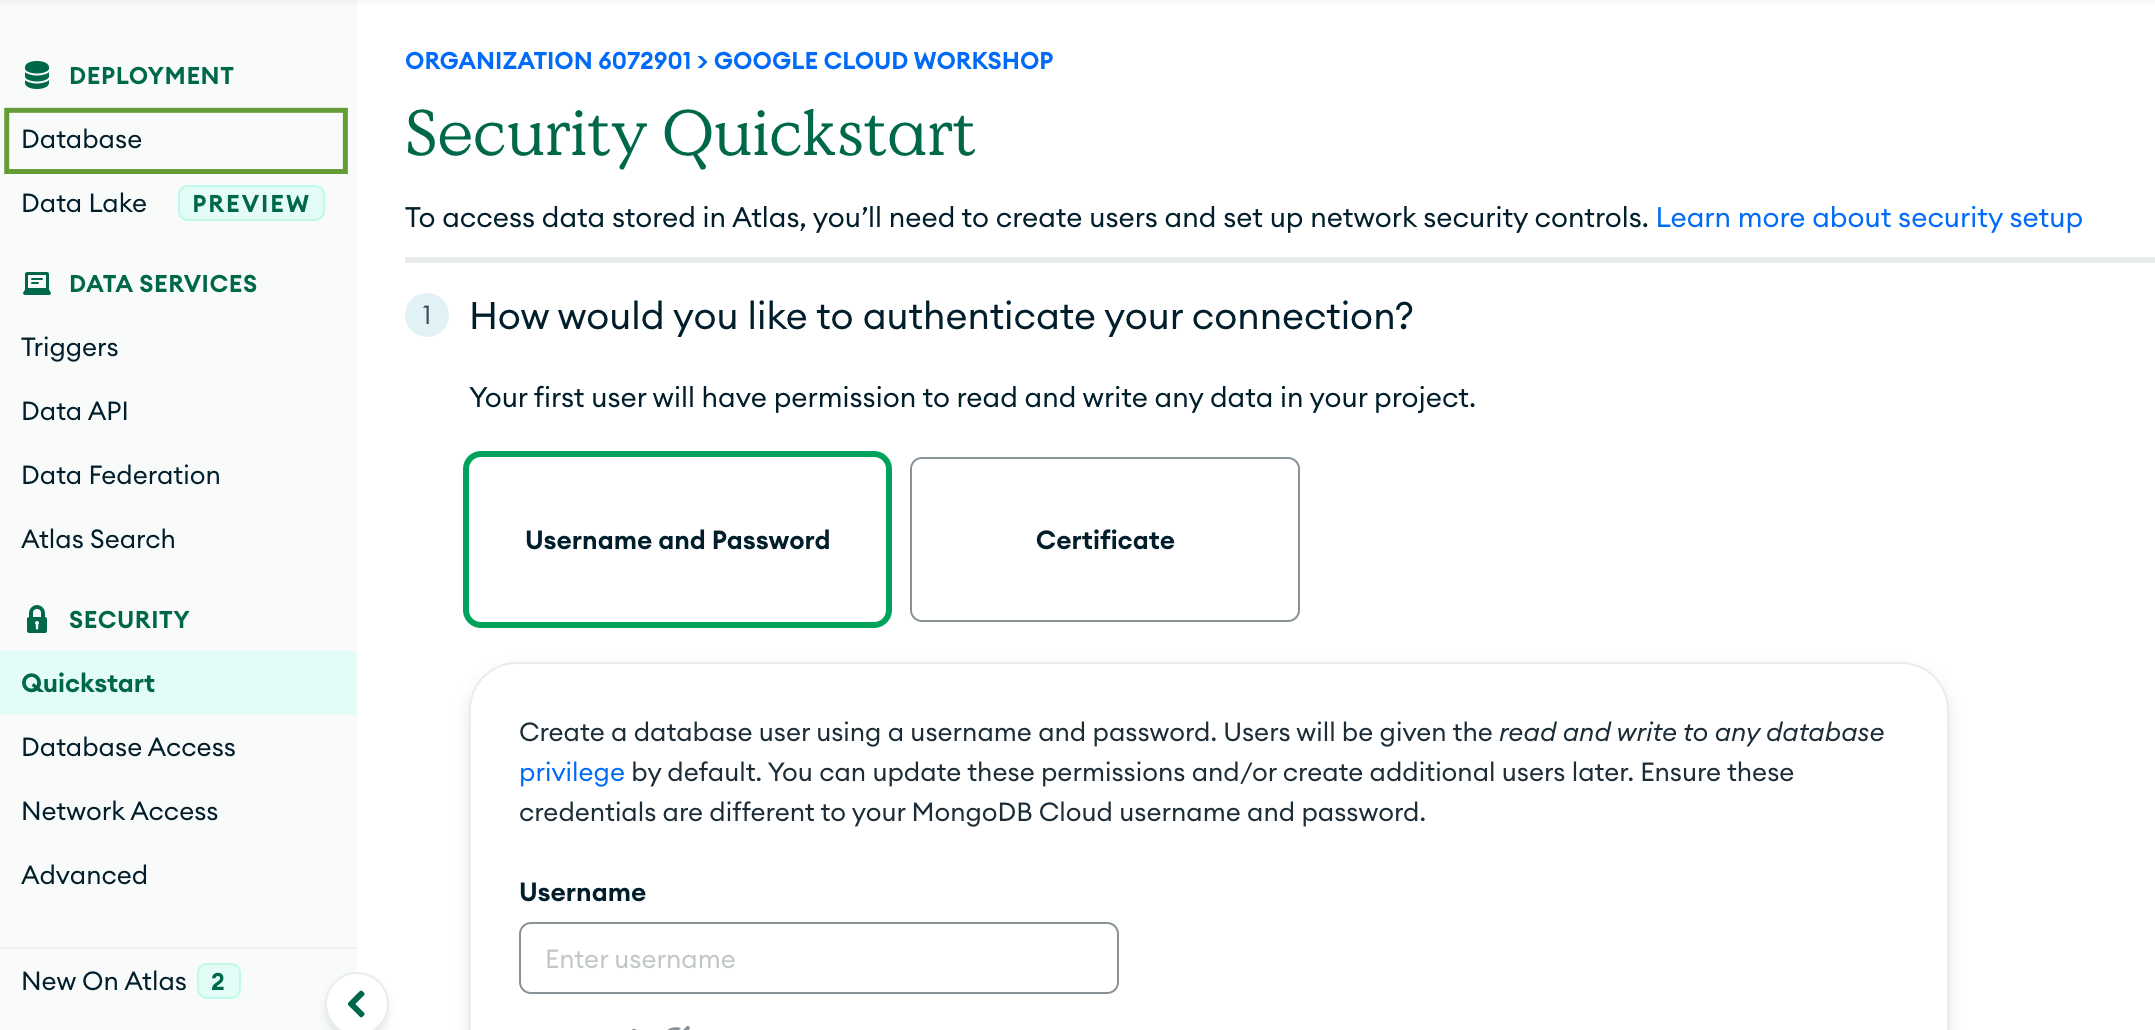 Security quickstart page highlighting the 'Database' tab in the left-hand menu